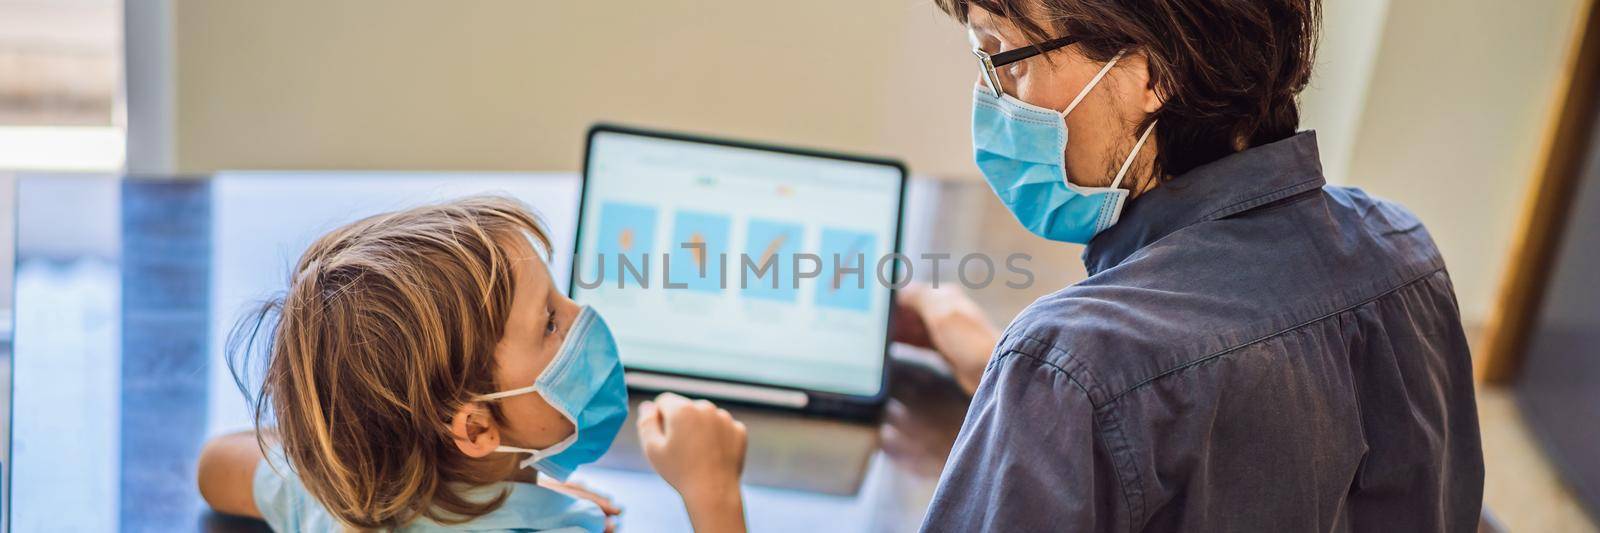 Boy studying online at home using a tablet. Father helps him learn. Father and son in medical masks to protect against coronovirus. Studying during quarantine. Global pandemic covid19 virus. BANNER, LONG FORMAT